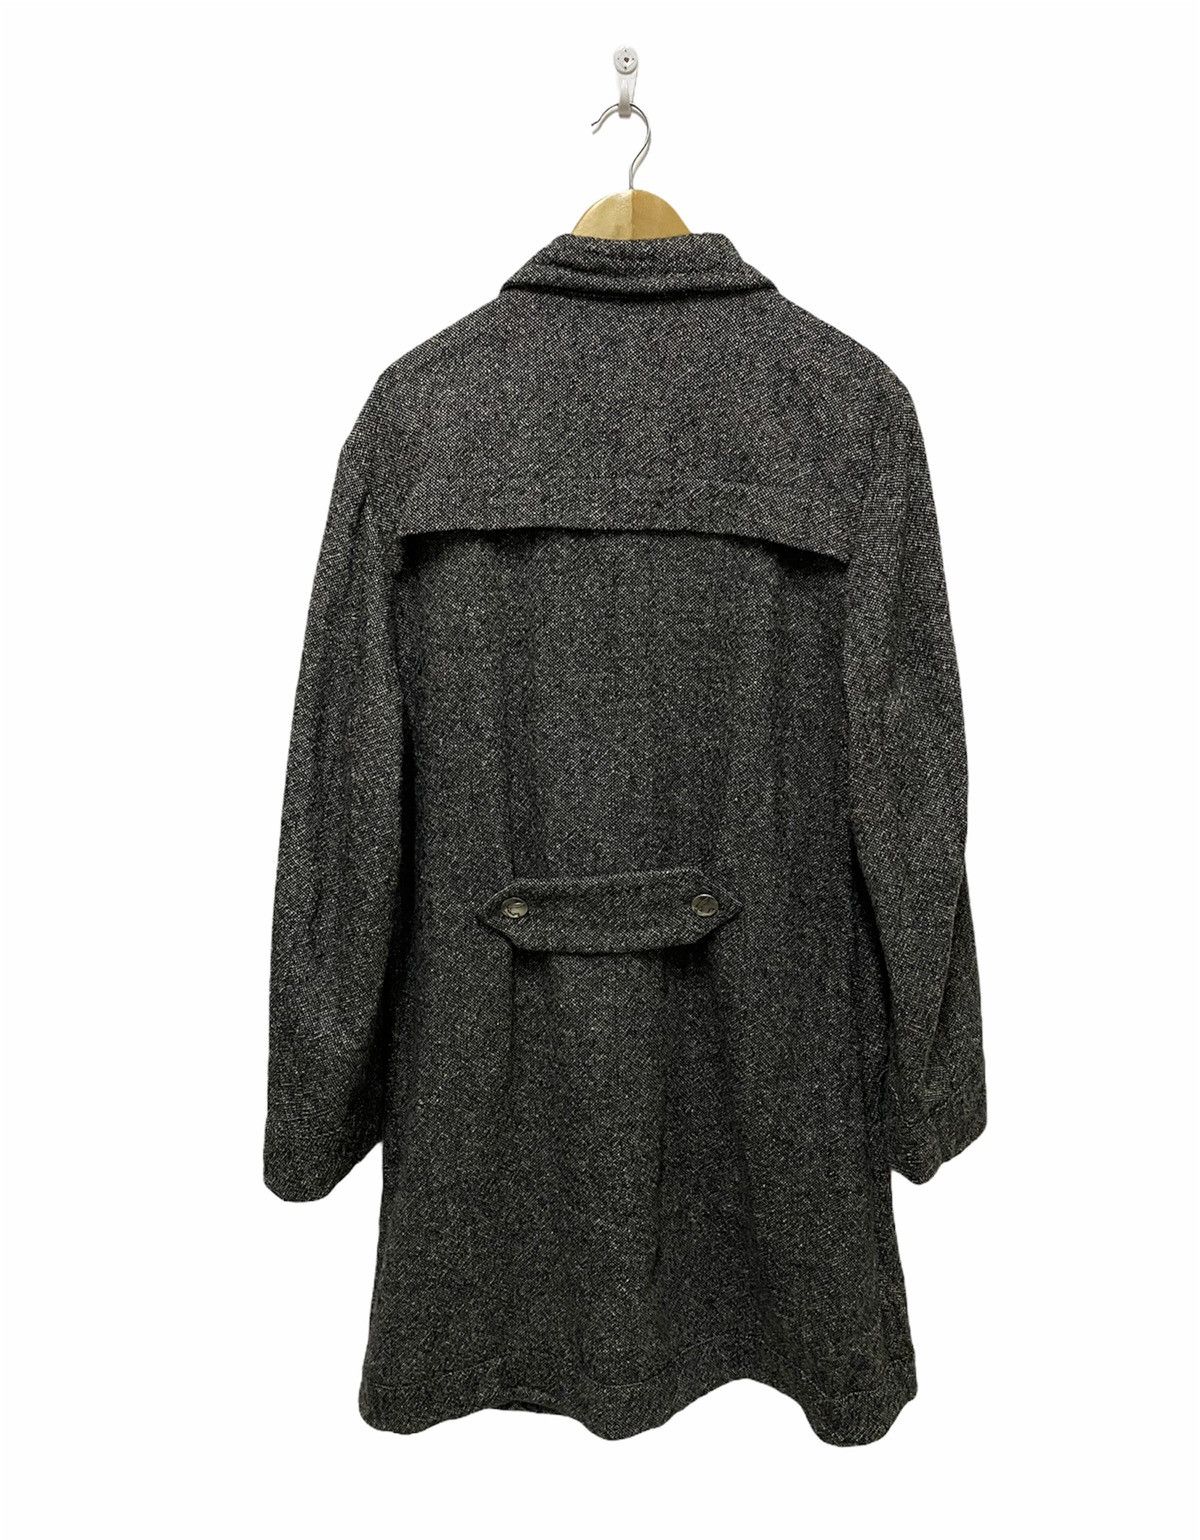 Vivienne Westwood Anglomania Wool Long Jacket Made in Italy - 2